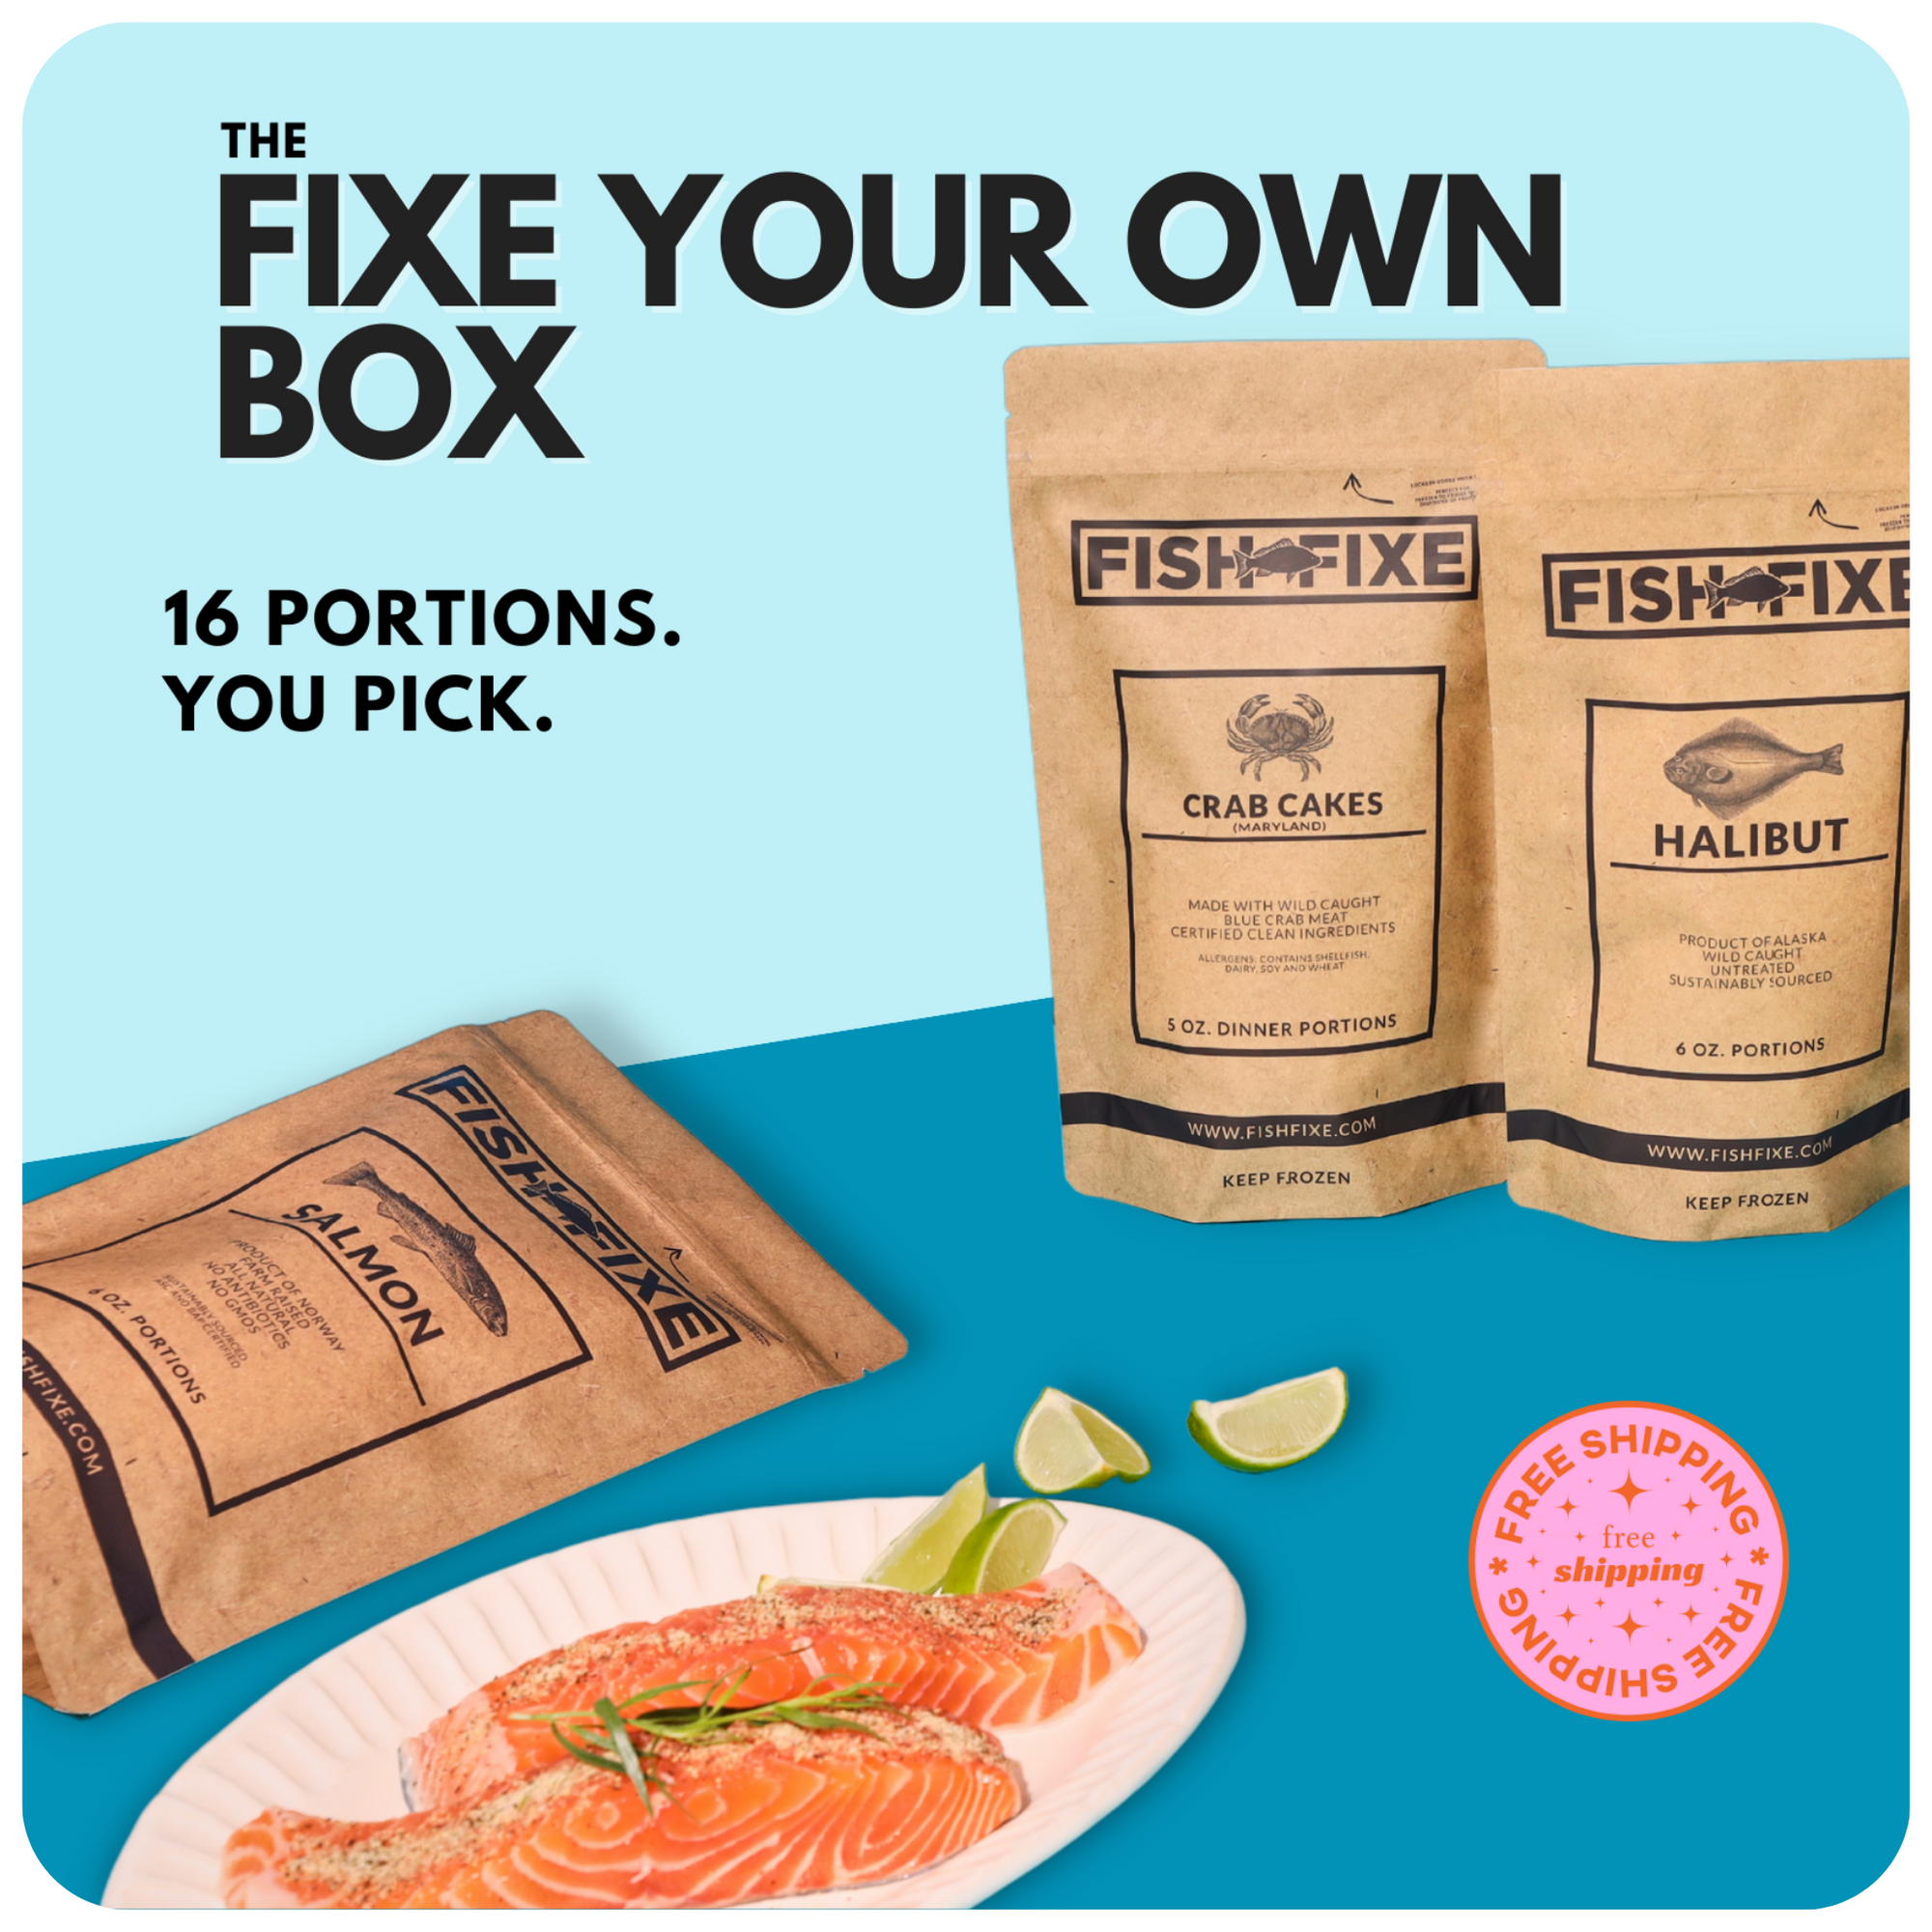 Fixe Your Own Box Fish Fish Fixe